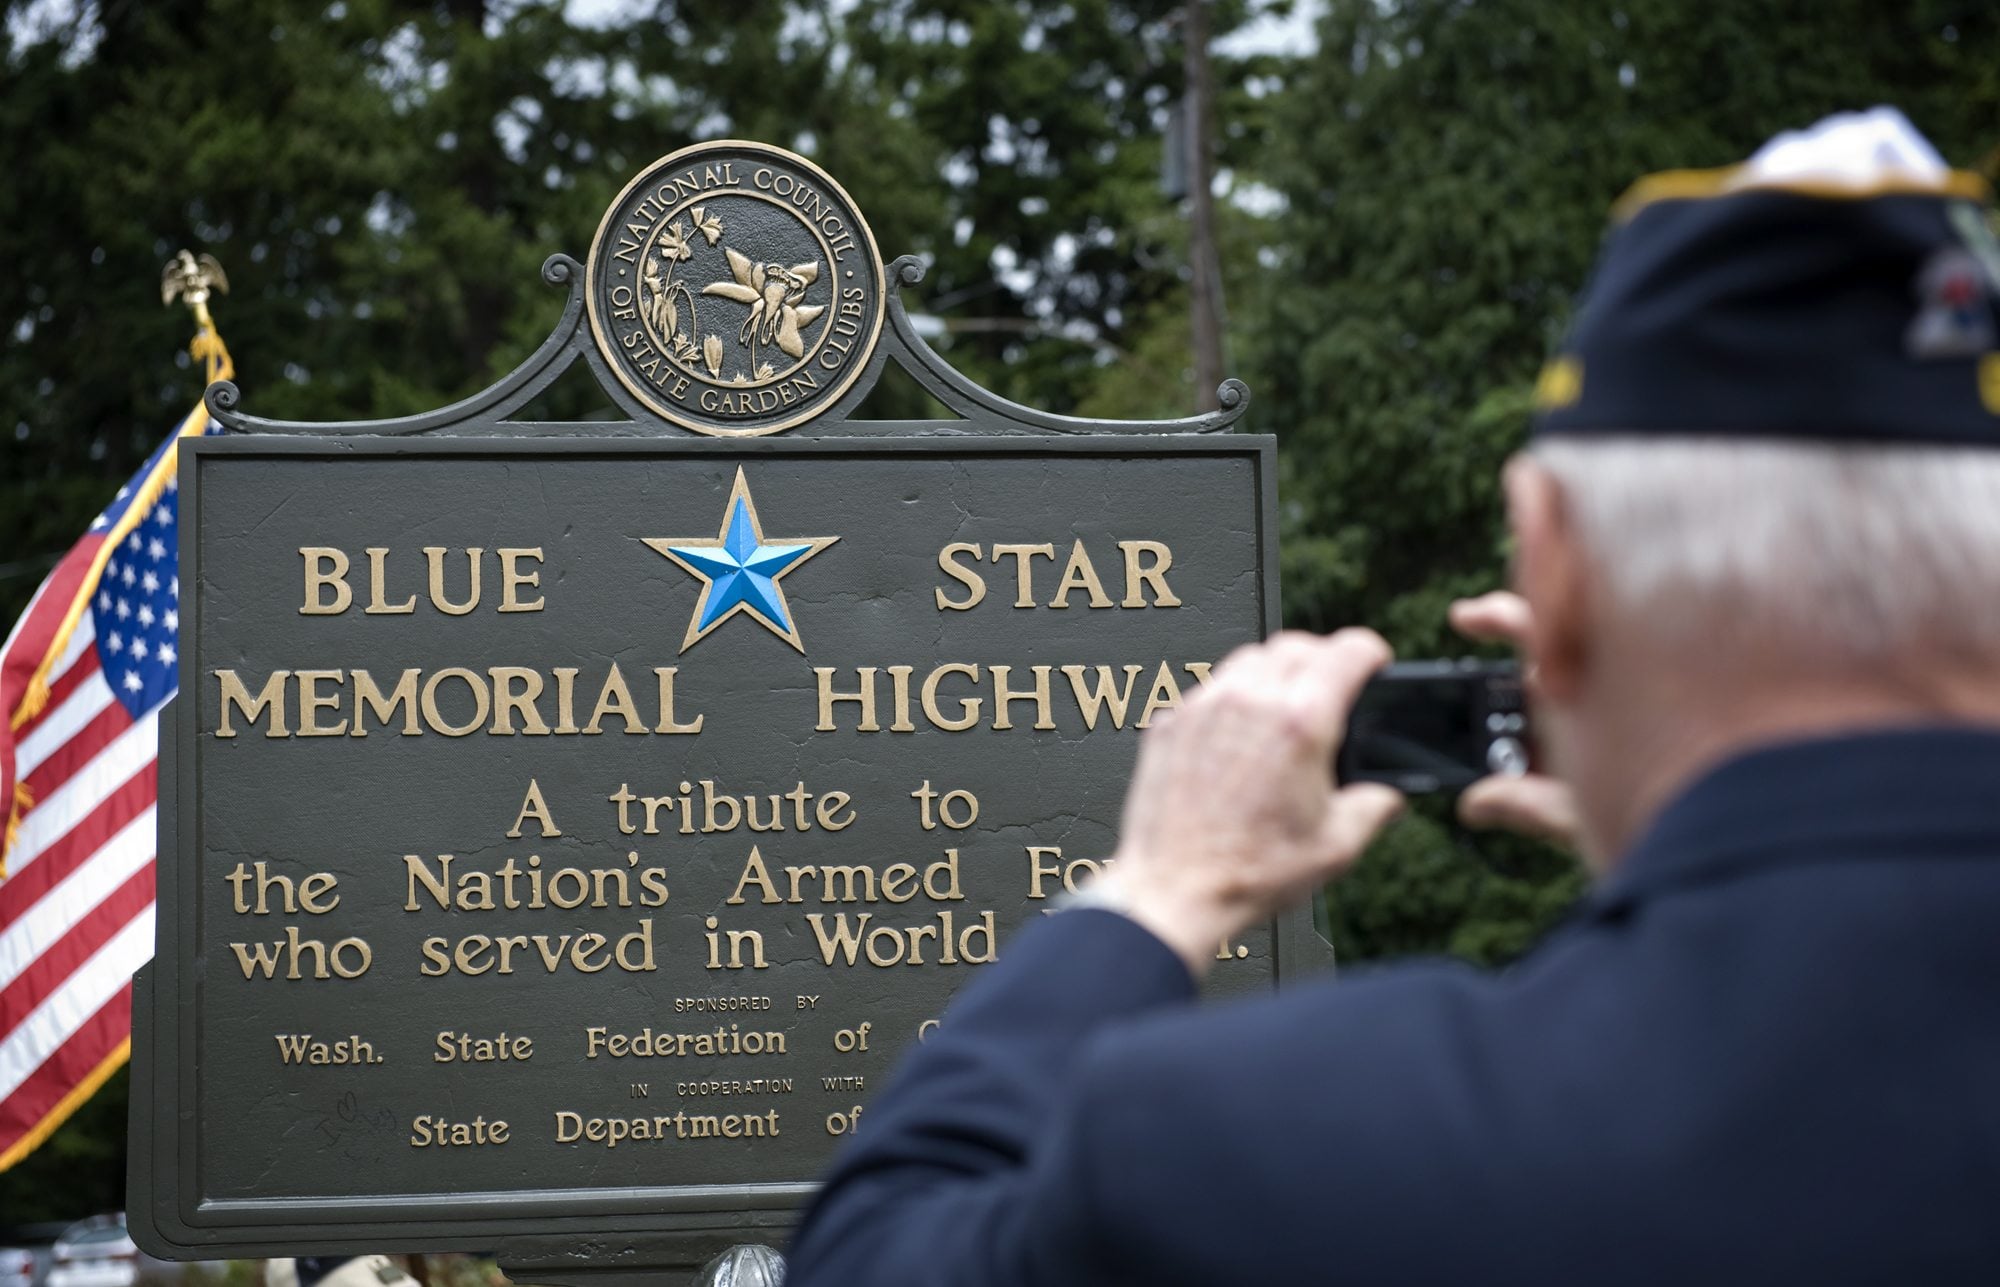 Rev. Jerry L. Keesee takes a photograph of the Blue Star Memorial Highway marker that was refurbished after vandals damaged it, during a re-dedication ceremony on Monday June 21, 2010.